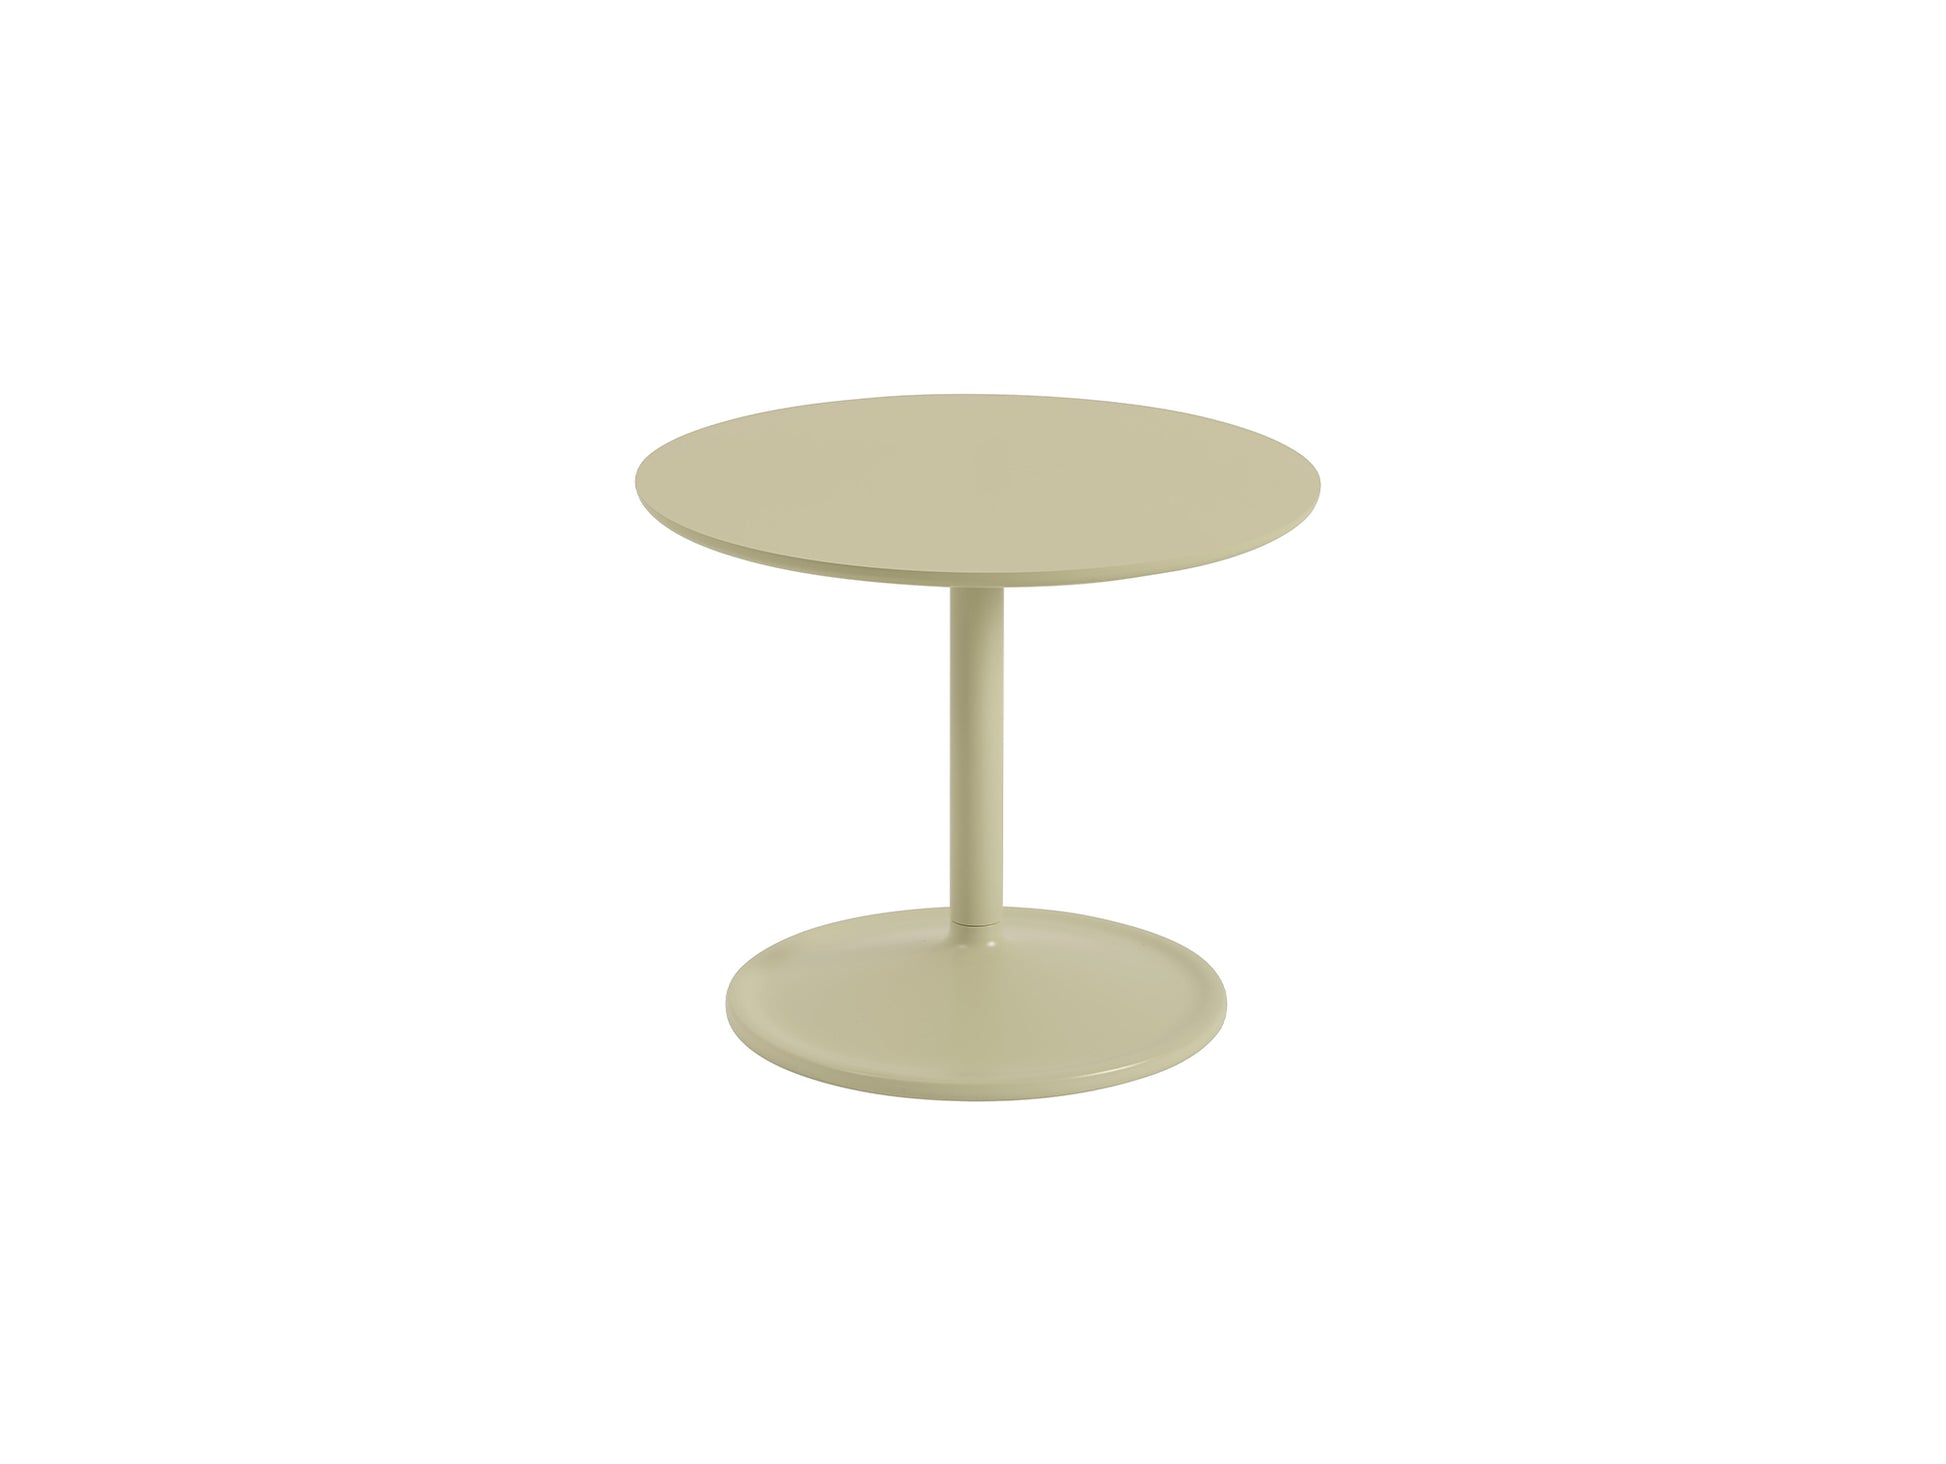 Soft Side Table by Muuto - Diameter : 48 cm / Height: 40 cm in beige green laminate top and beige green base